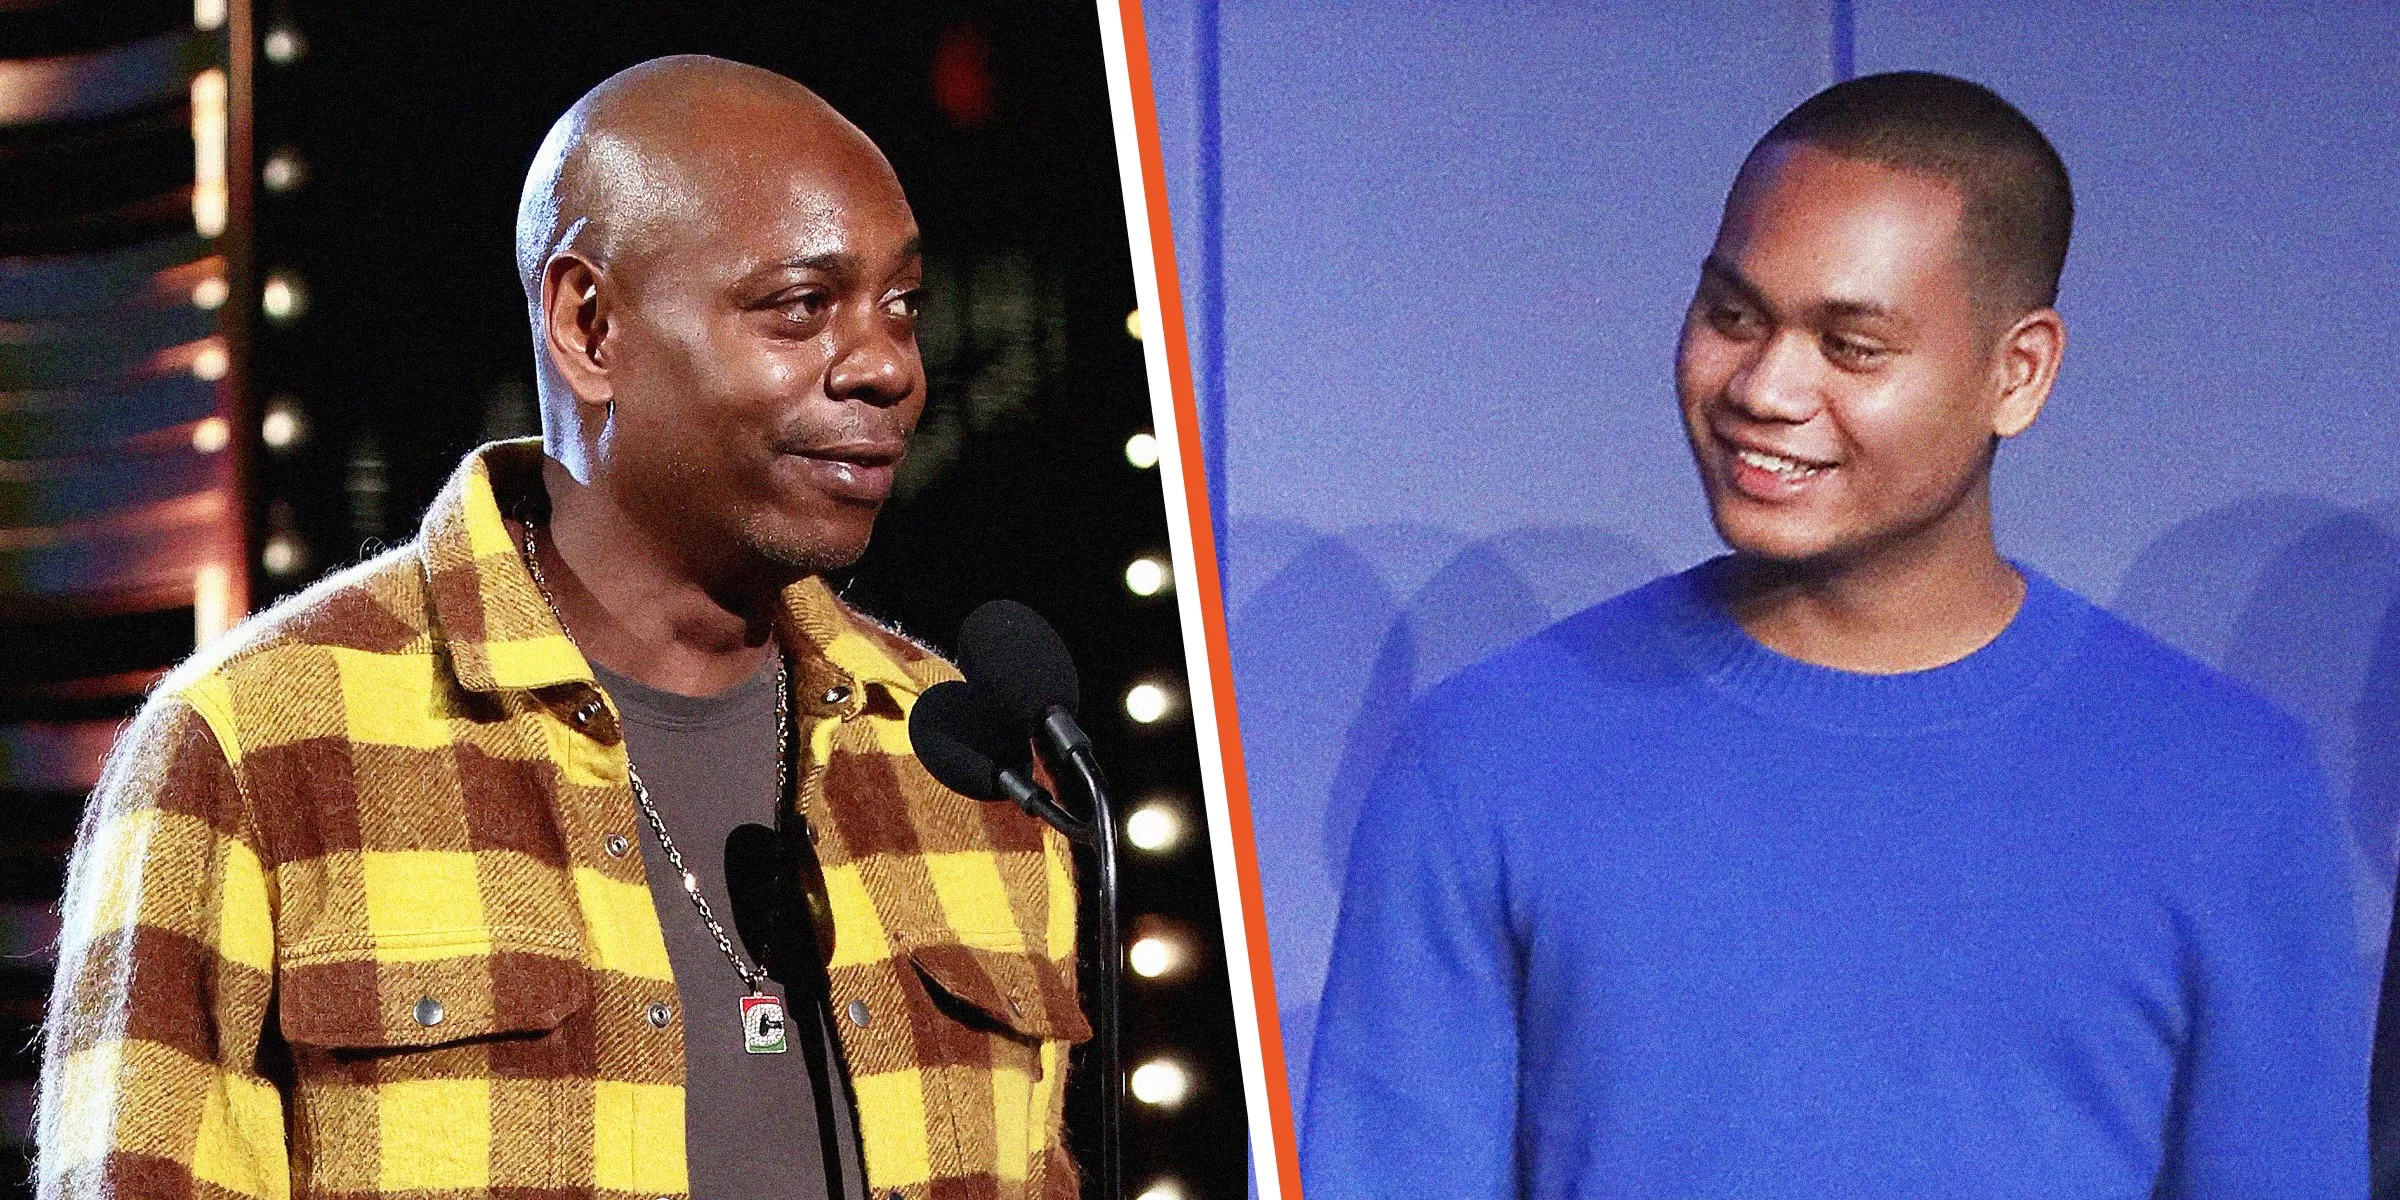 Ibrahim Chappelle Biography: American comedian Dave Chappelle's Son, Age, Family, Siblings, Net Worth